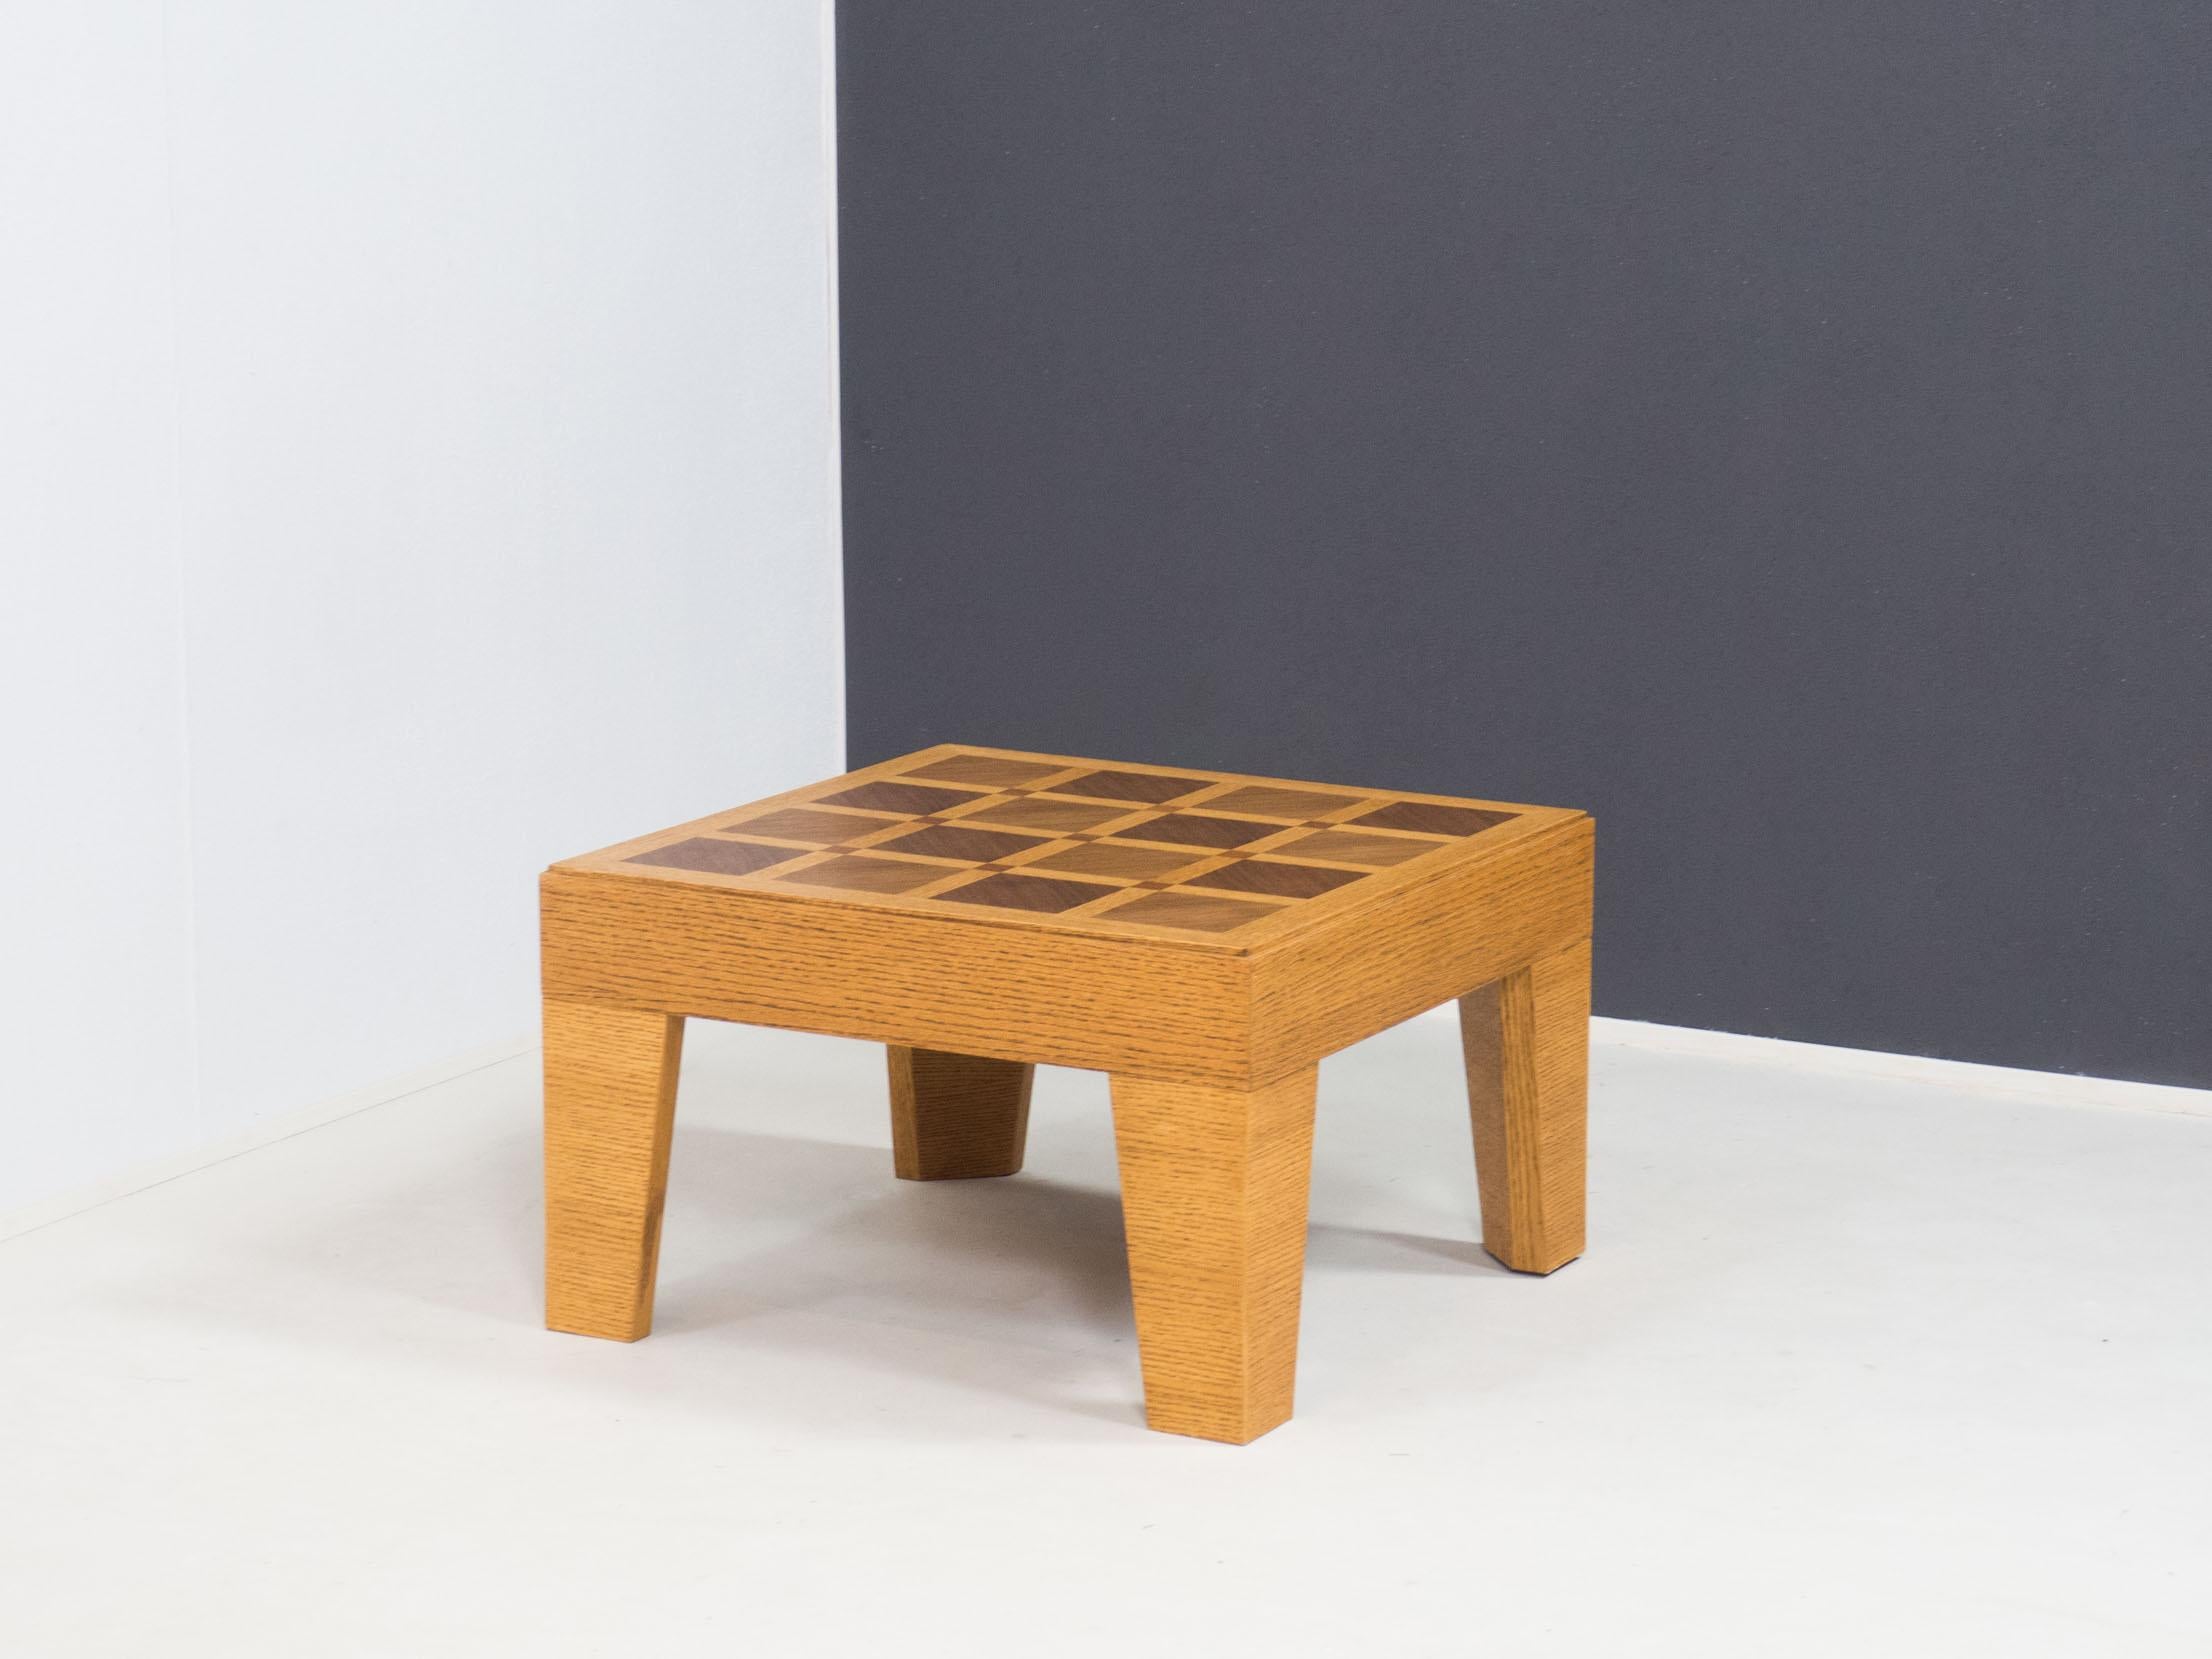 Vintage square low coffee table with graphic design, most likely from the late 1970s.

This unusual table is made from an oak and walnut veneered top in a art deco type pattern.
The sides and legs are also veneered in oak.

This table is in